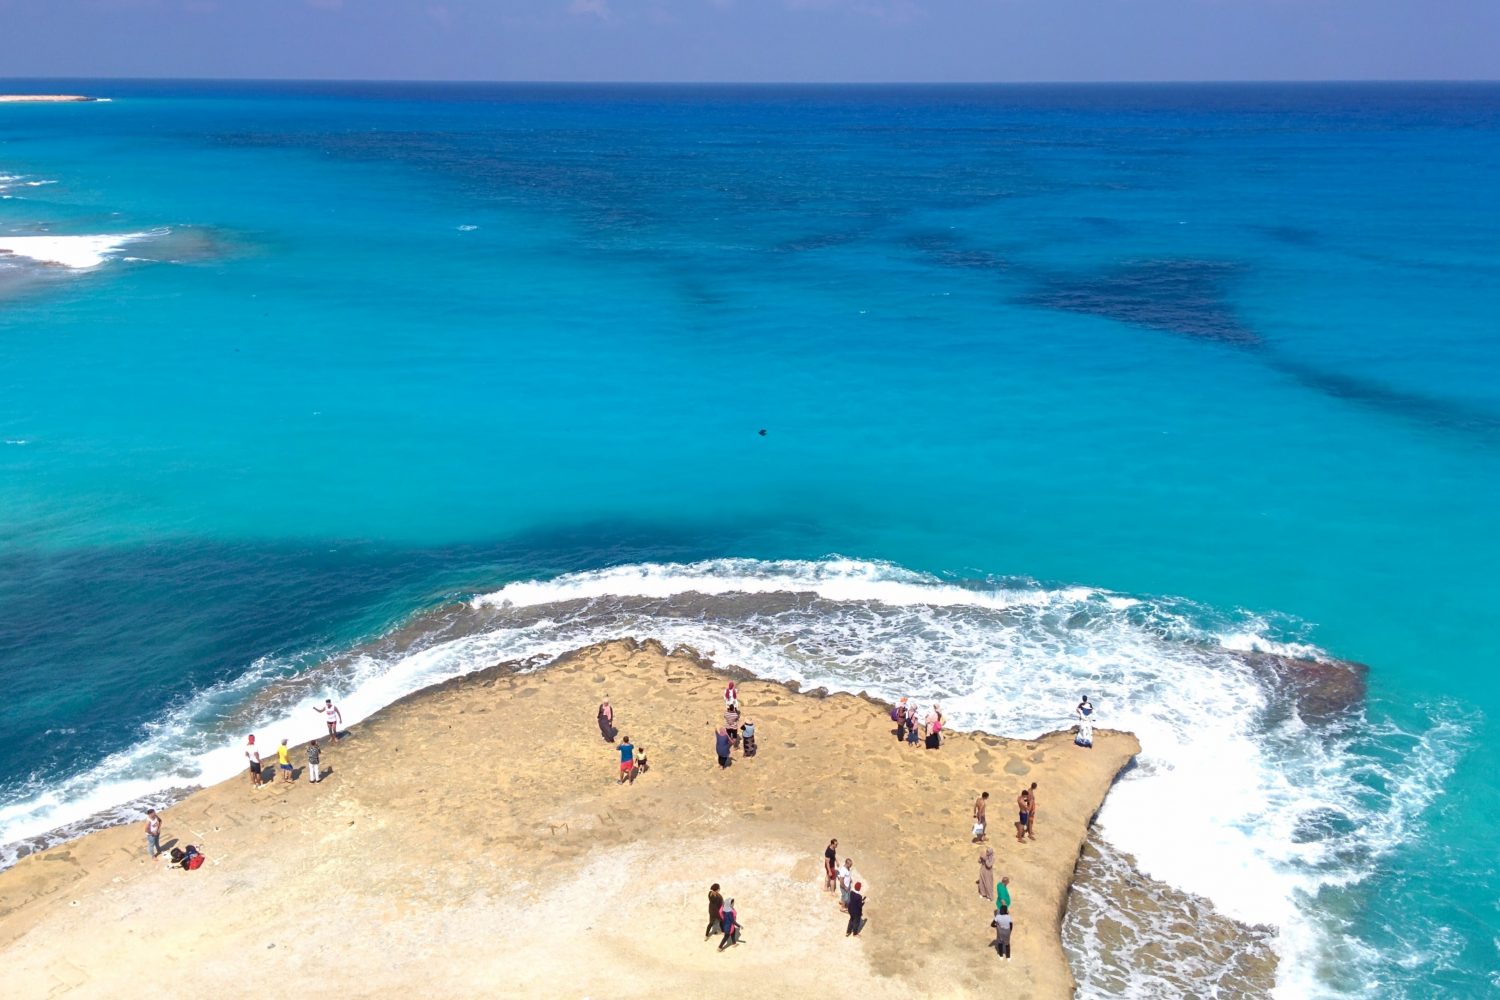 Low cliff on the shore of Agiba in Marsa Matrouh, Egypt